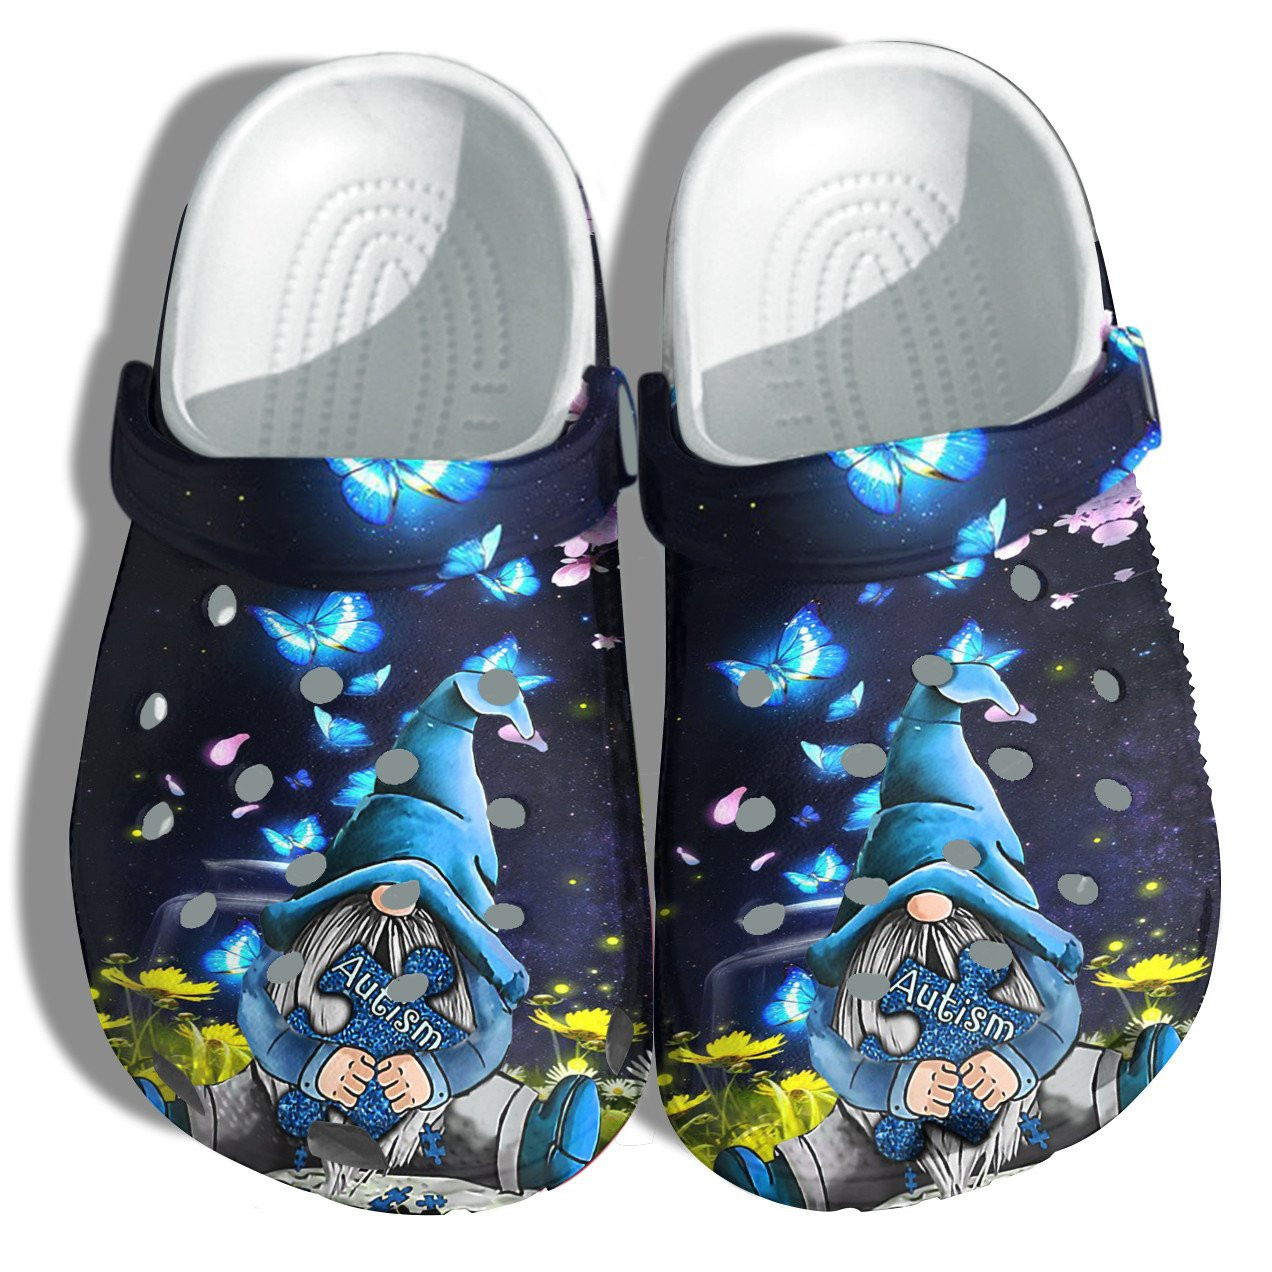 Blue Gnome And Butterfly Autism Awareness Crocs Clogs Shoes Birthday Gifts For Daughter